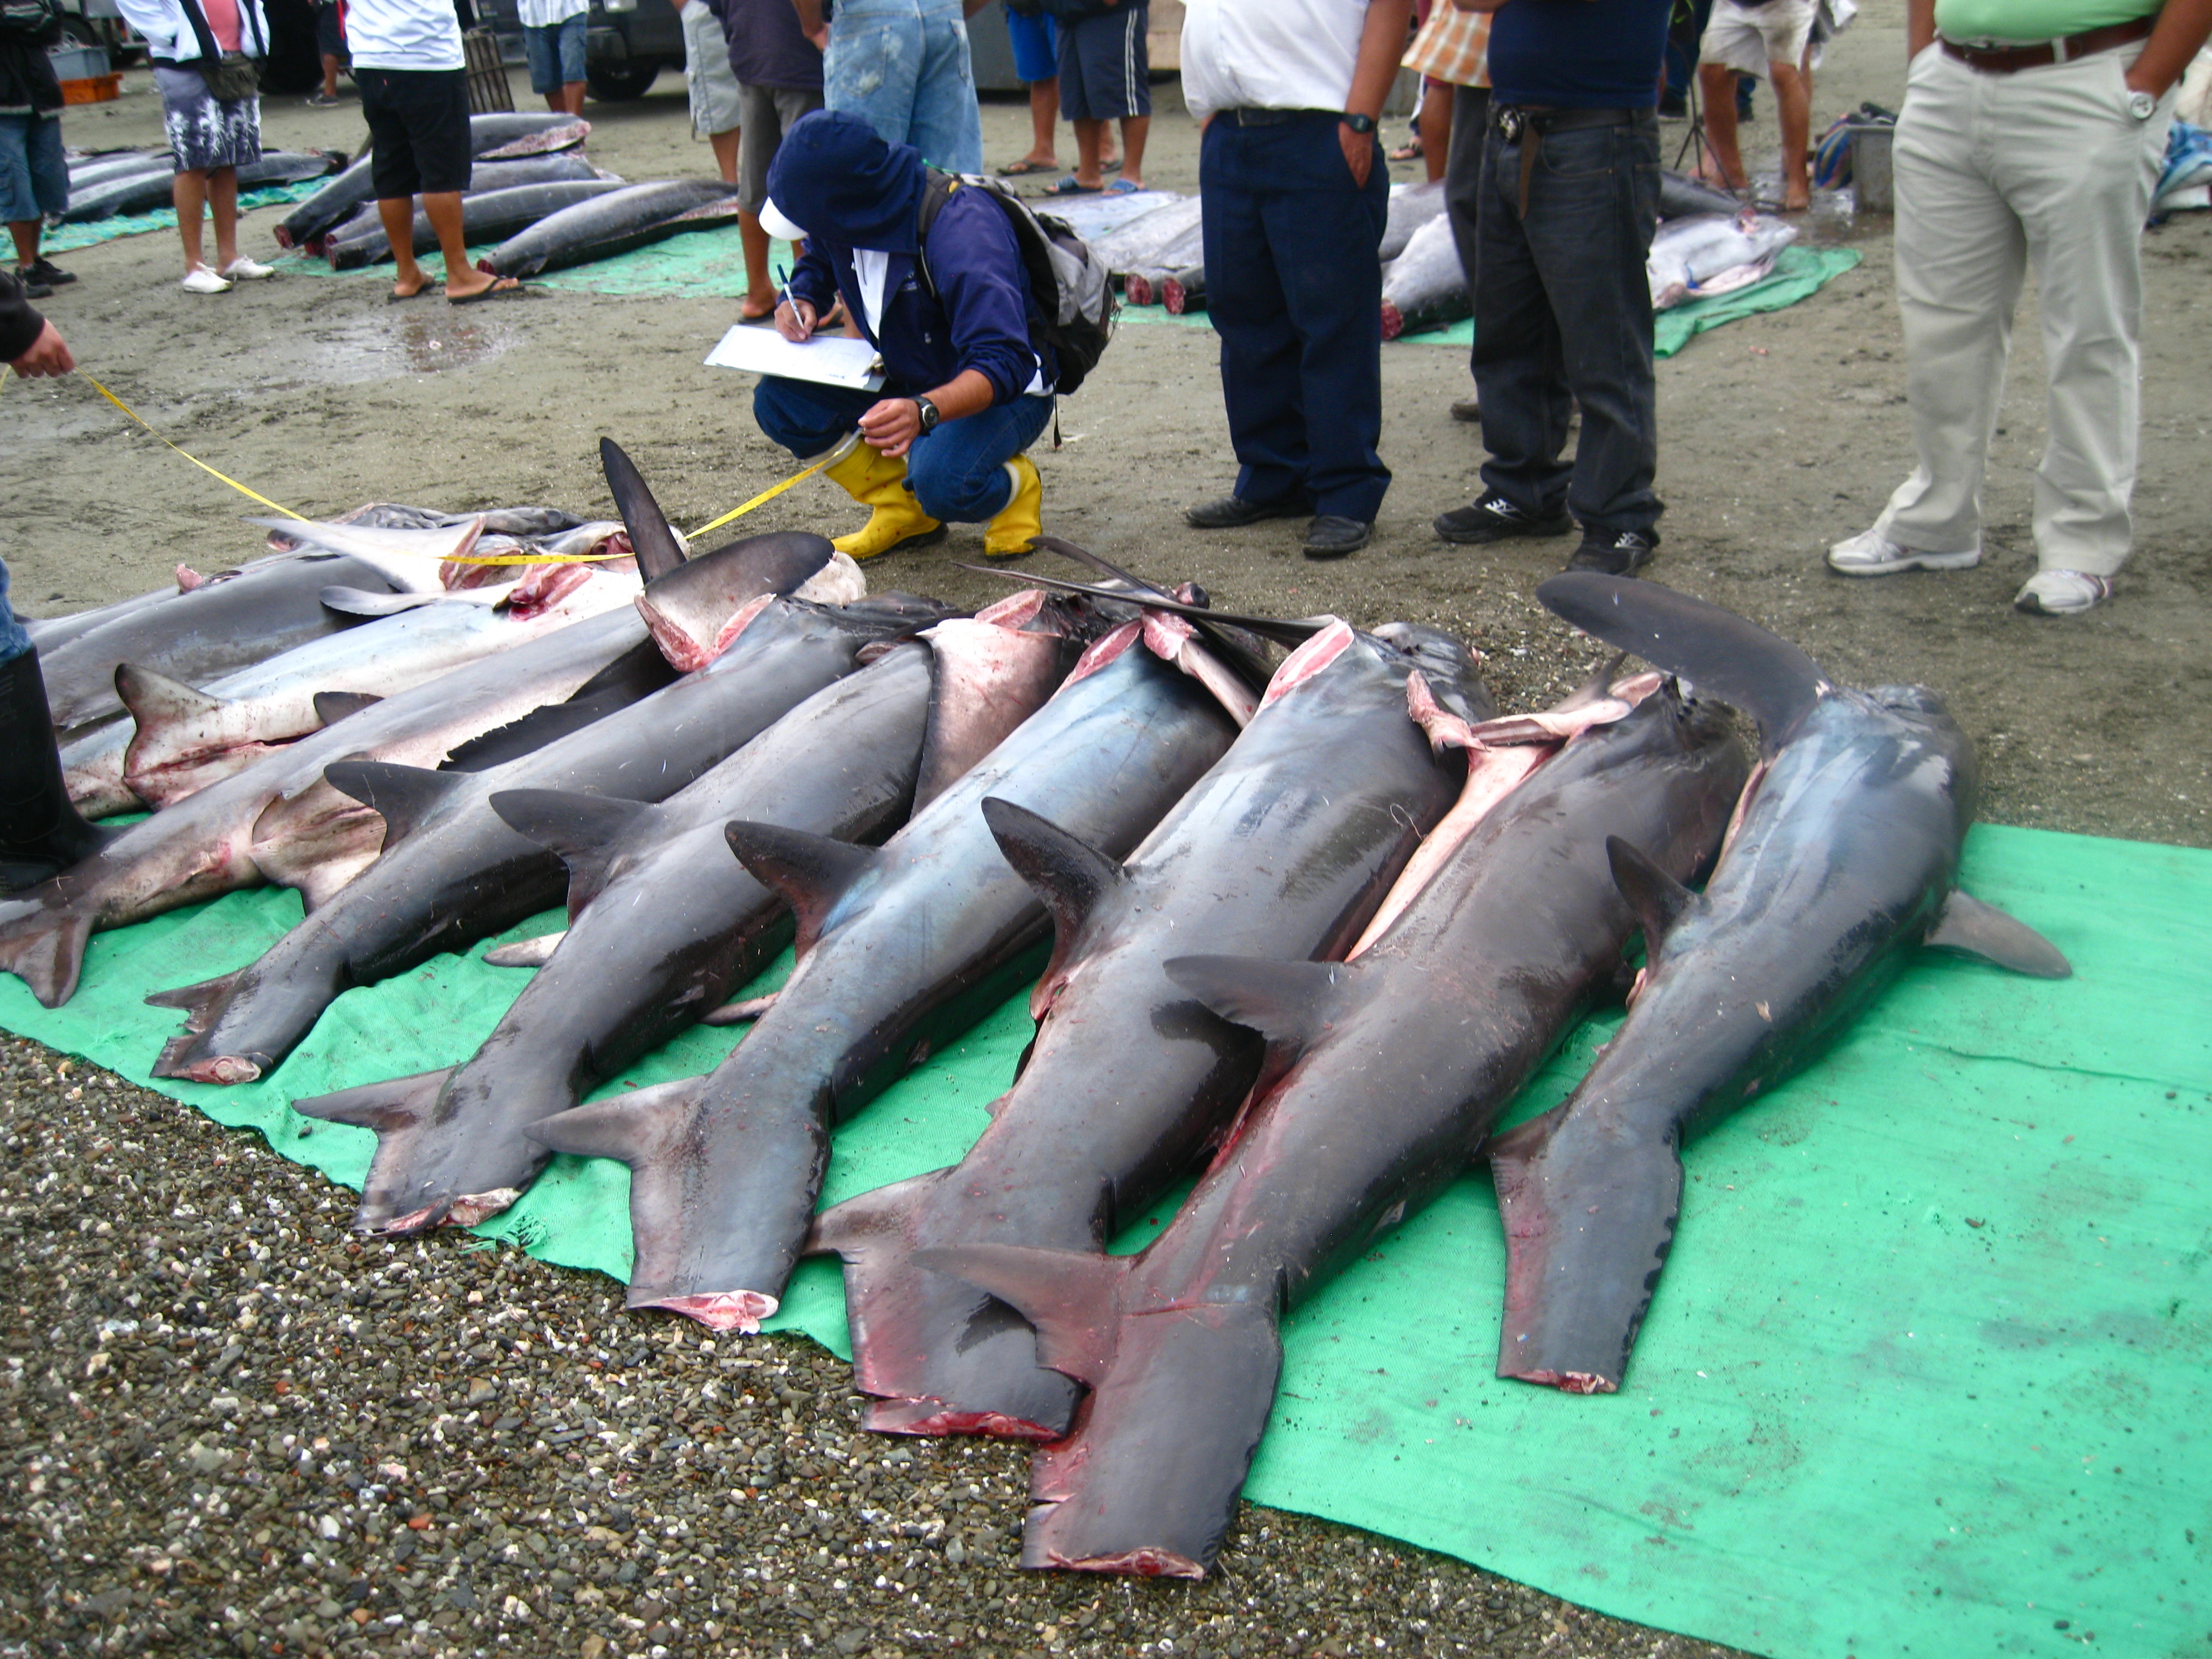 Shark Fin Trade: Why it Should be Banned in the United States